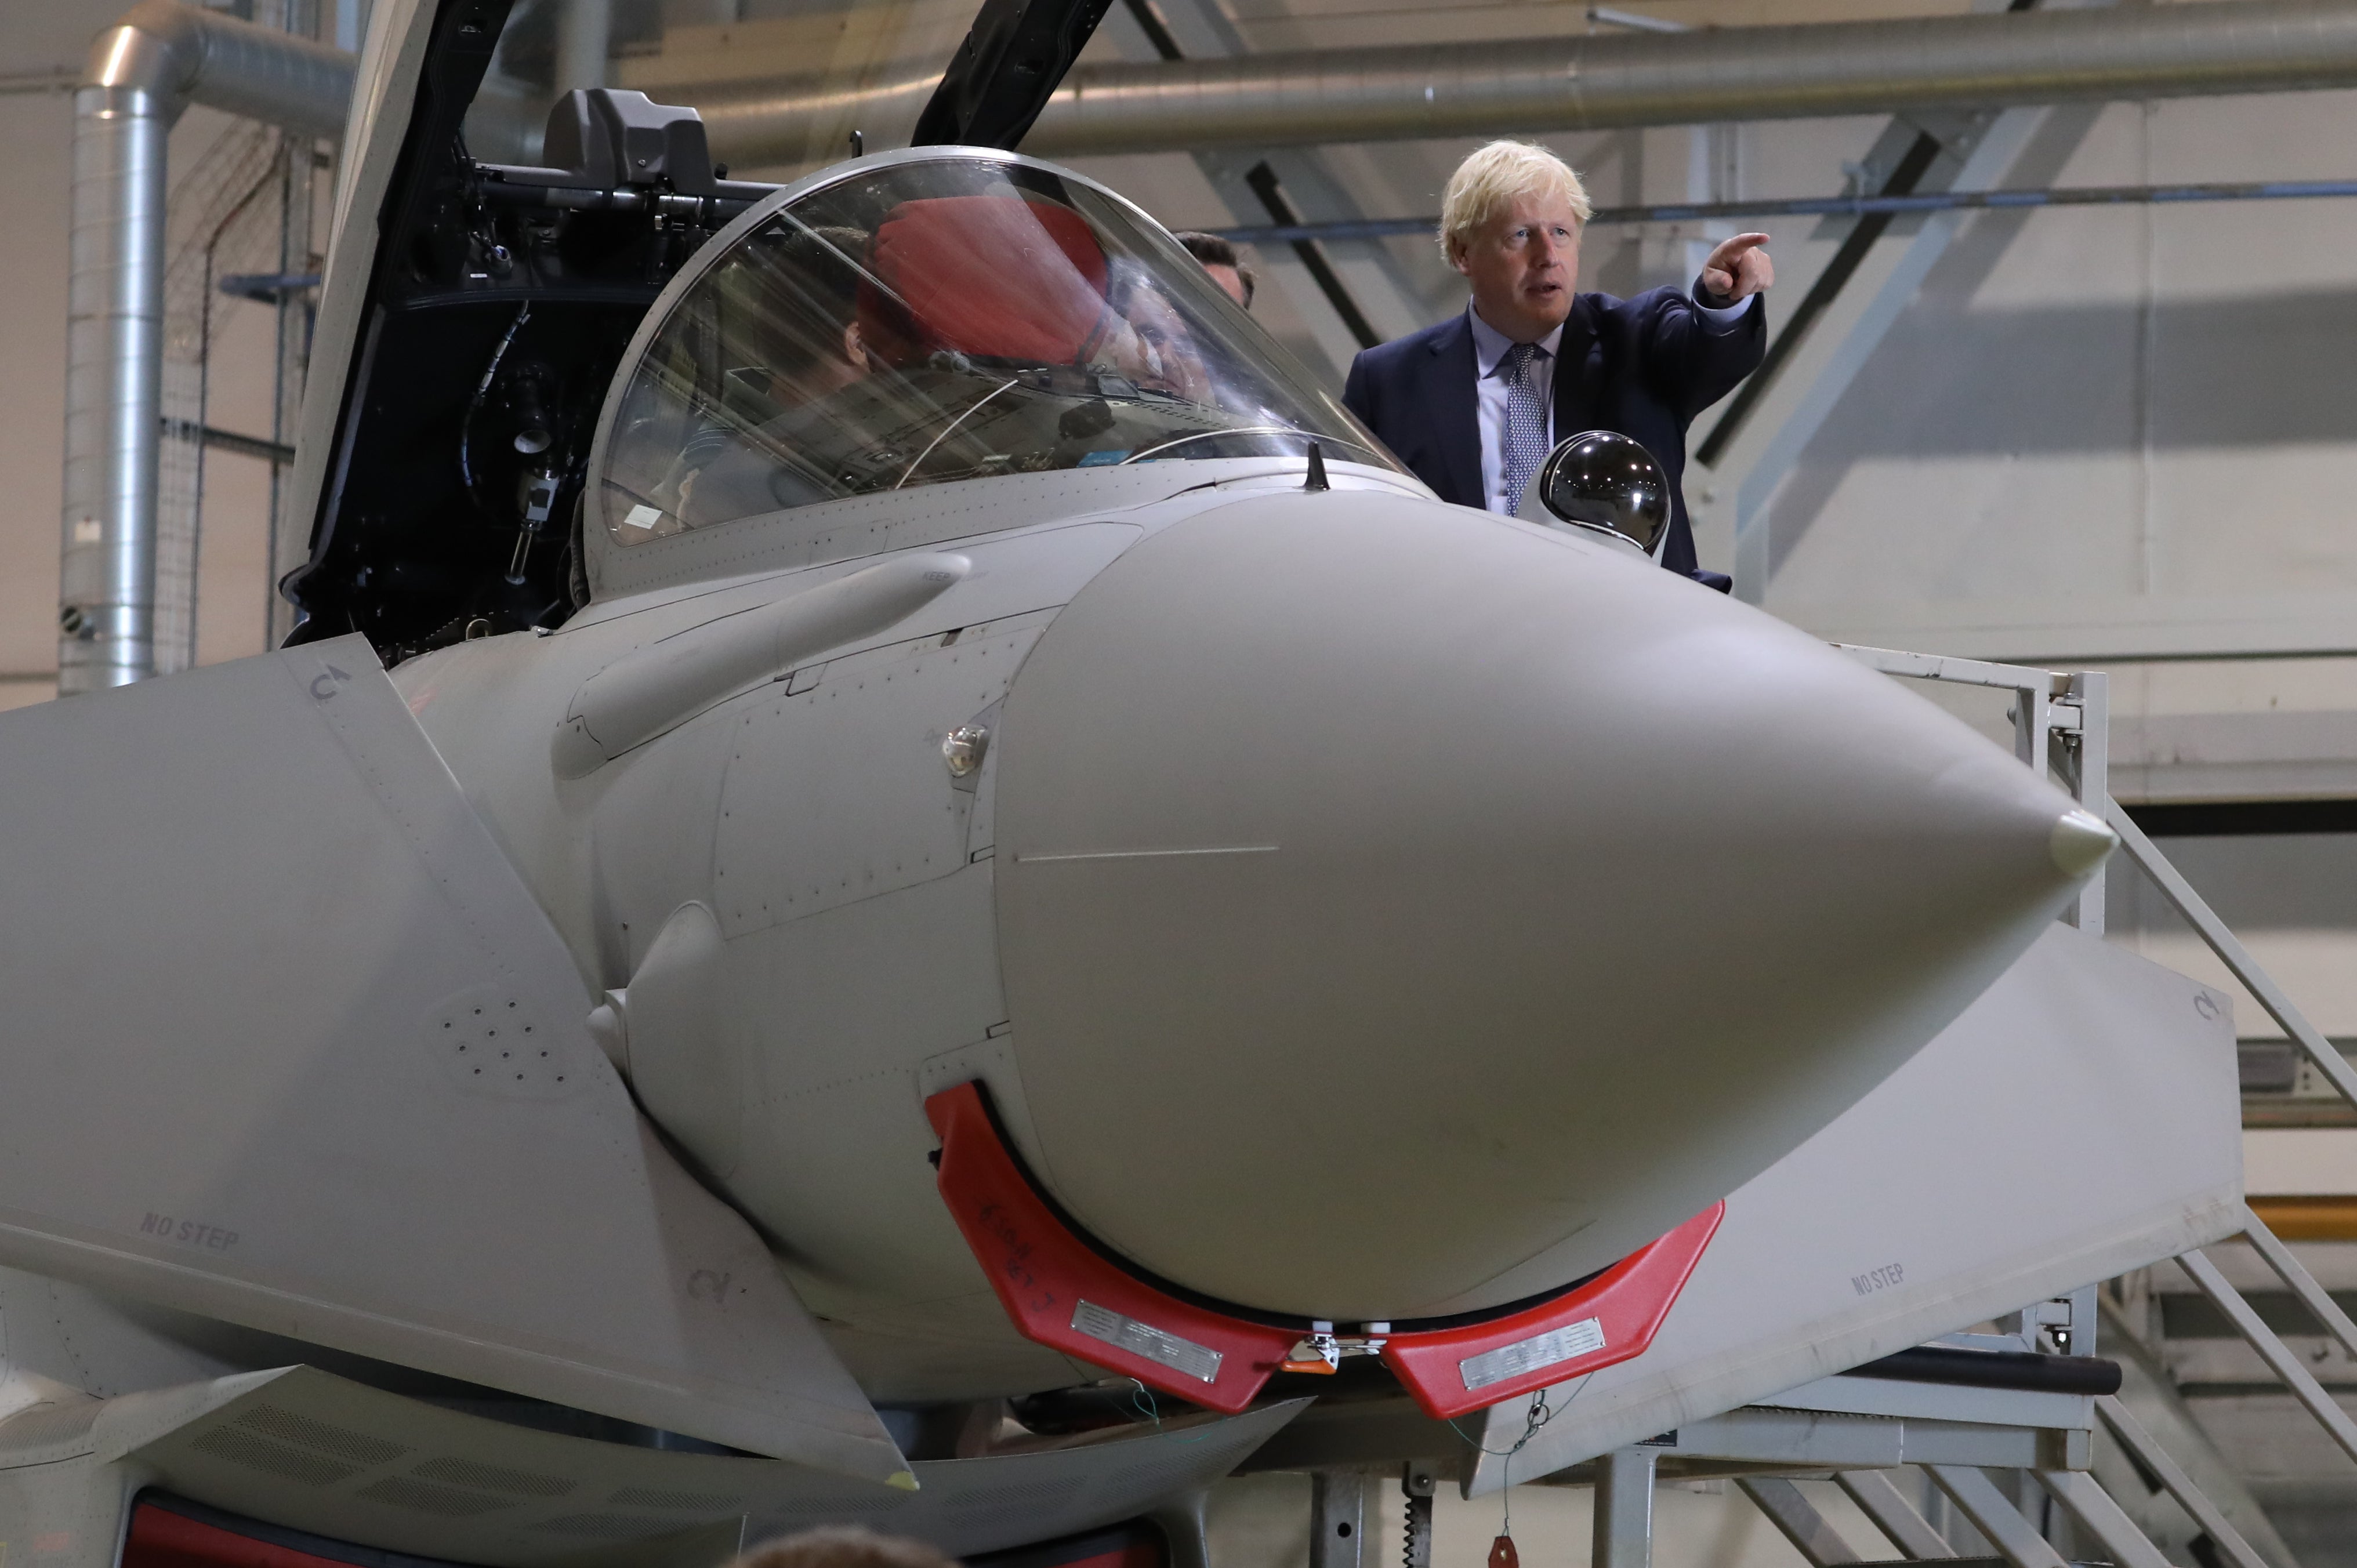 The UK had a 16 per cent share of the global arms trade in 2019